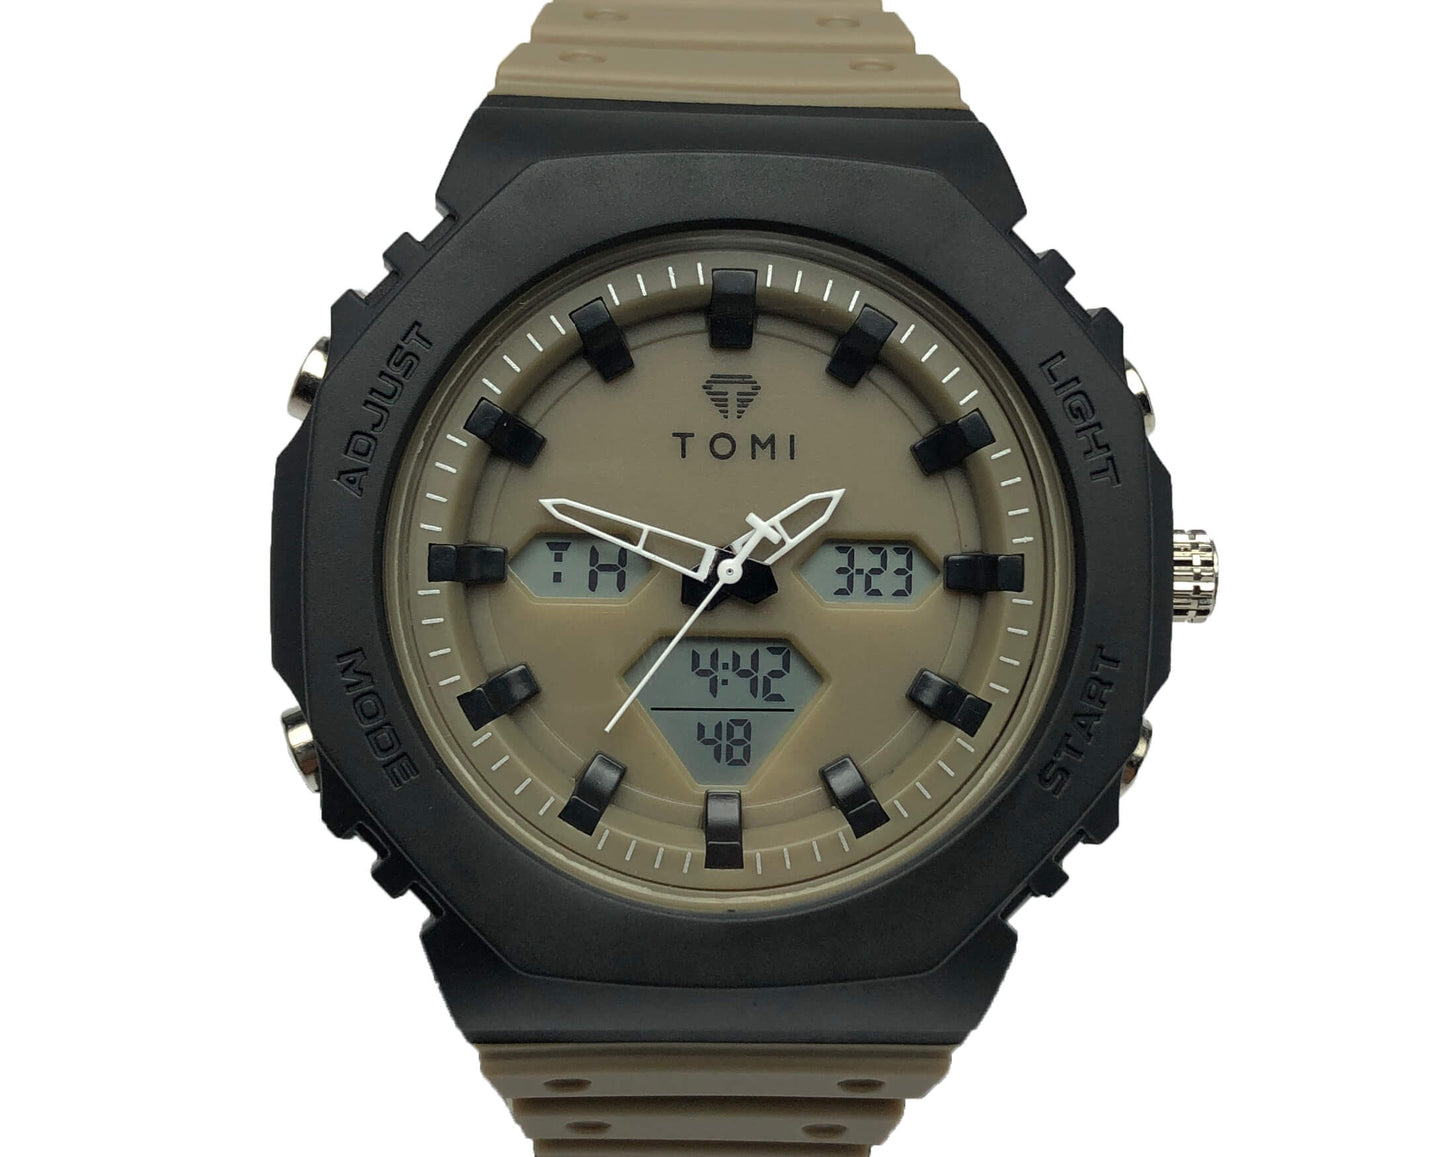 TOMI T-217 Dual Time Sports Watch